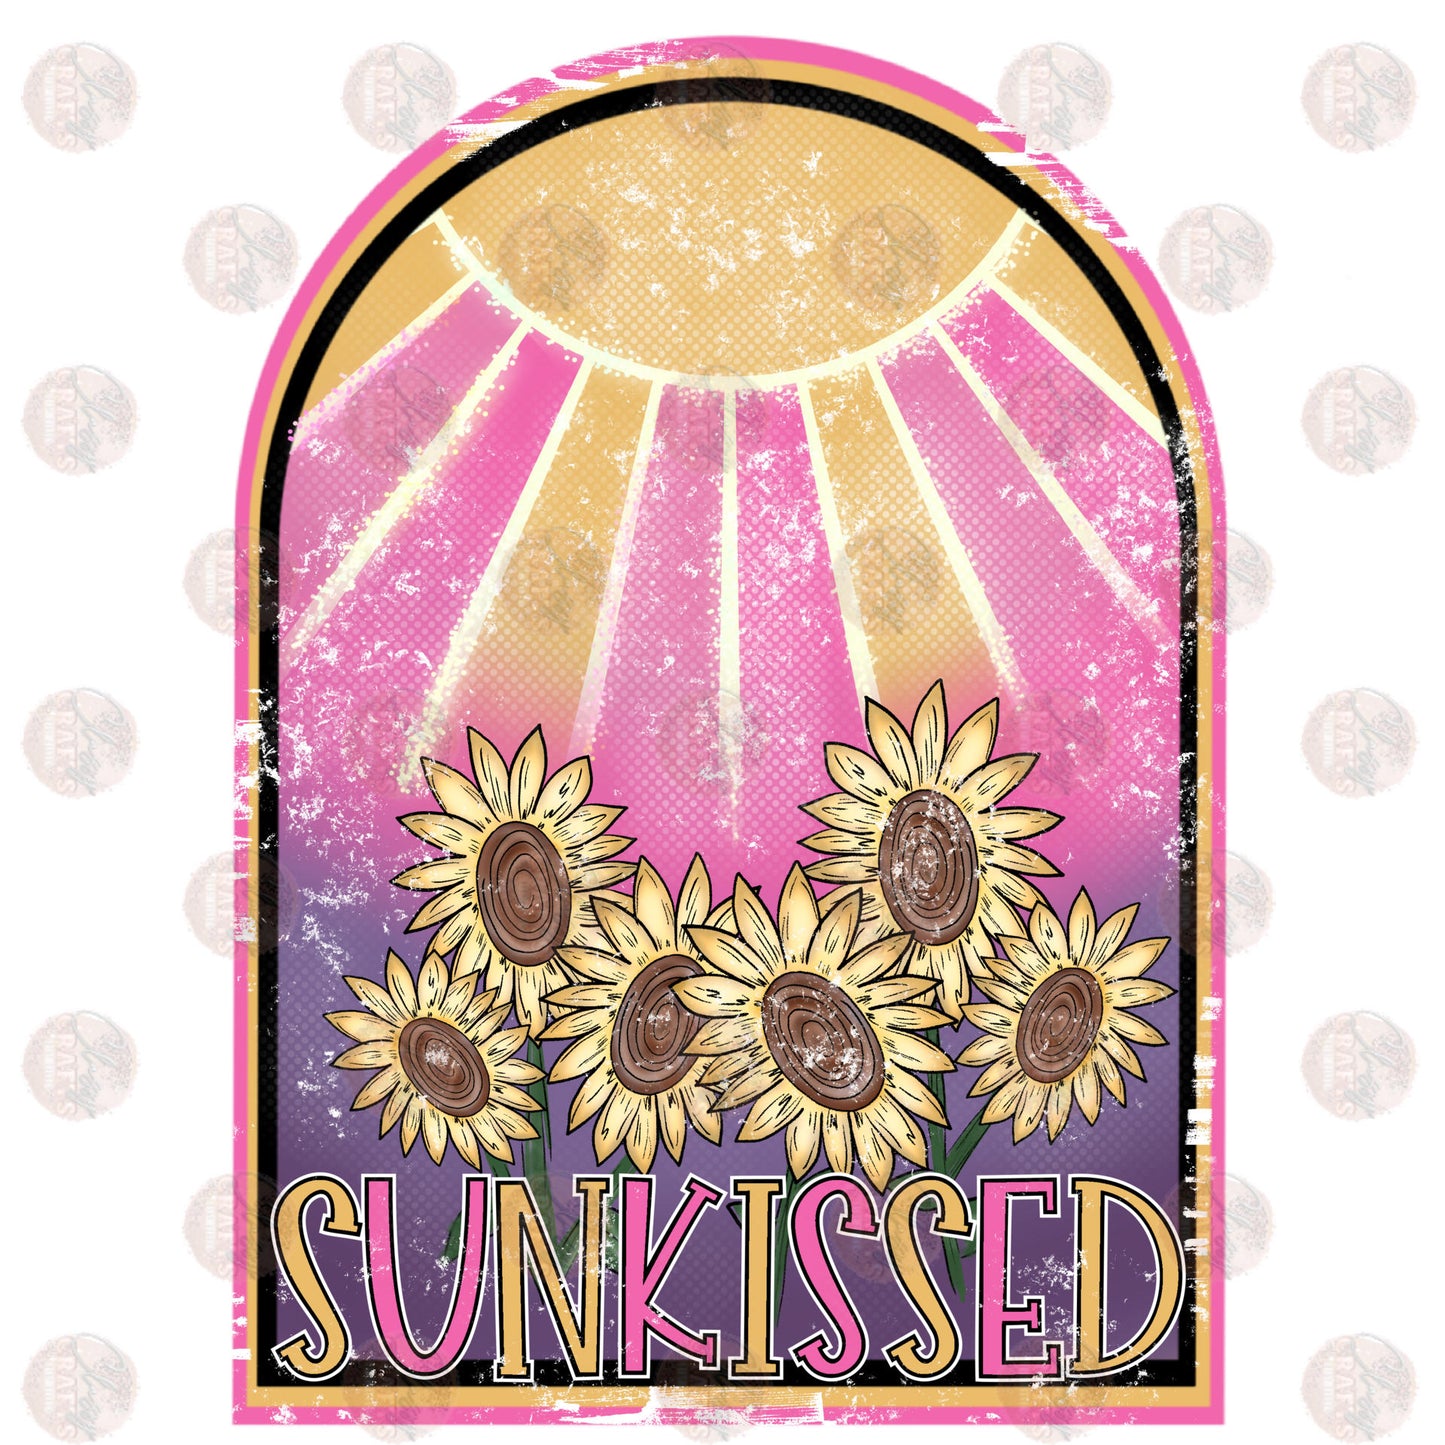 Sunkissed - Sublimation Transfer